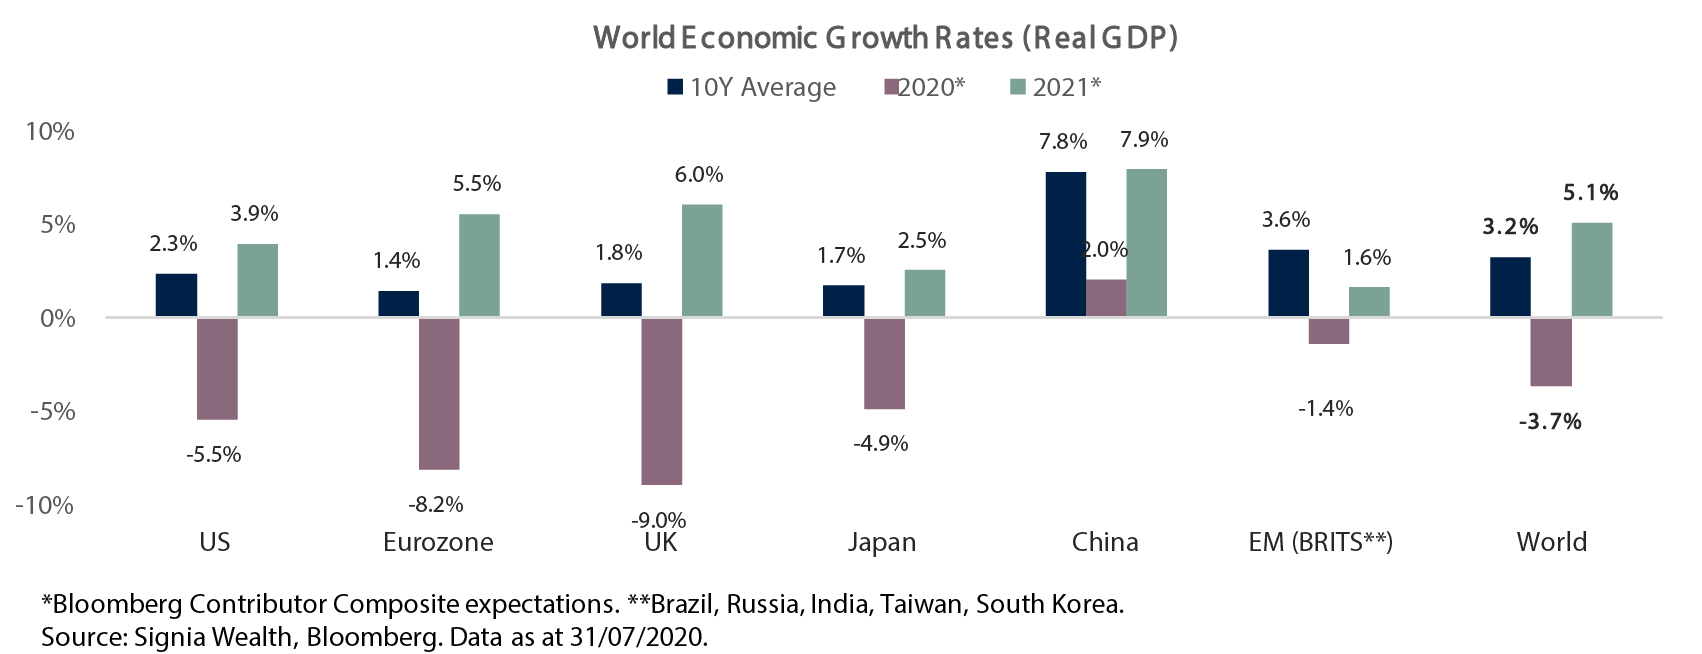 July World Economic Growth Rates (Real GDP